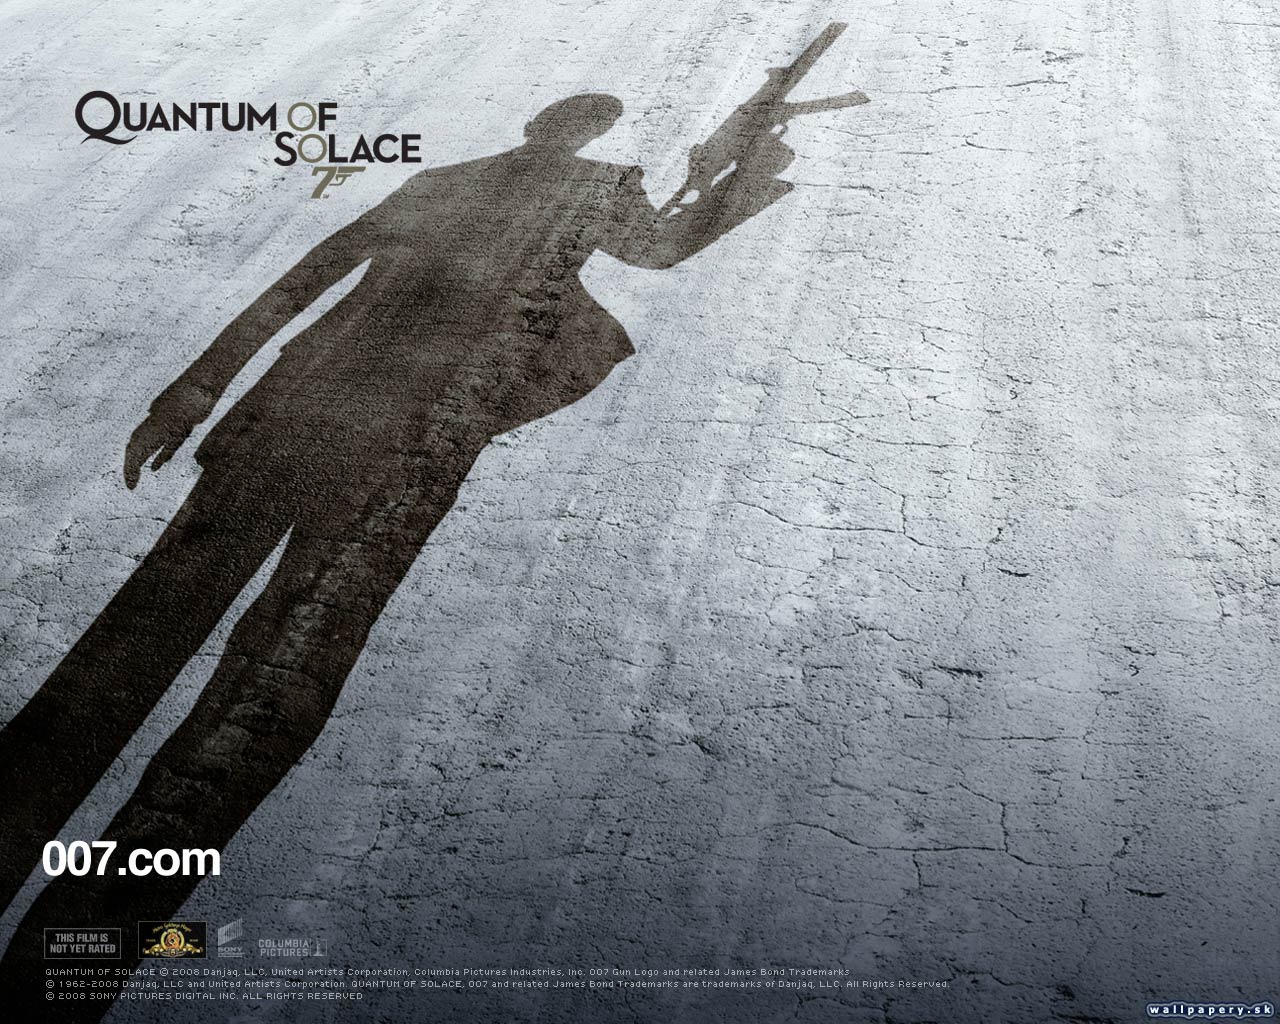 Quantum of Solace: The Game - wallpaper 1